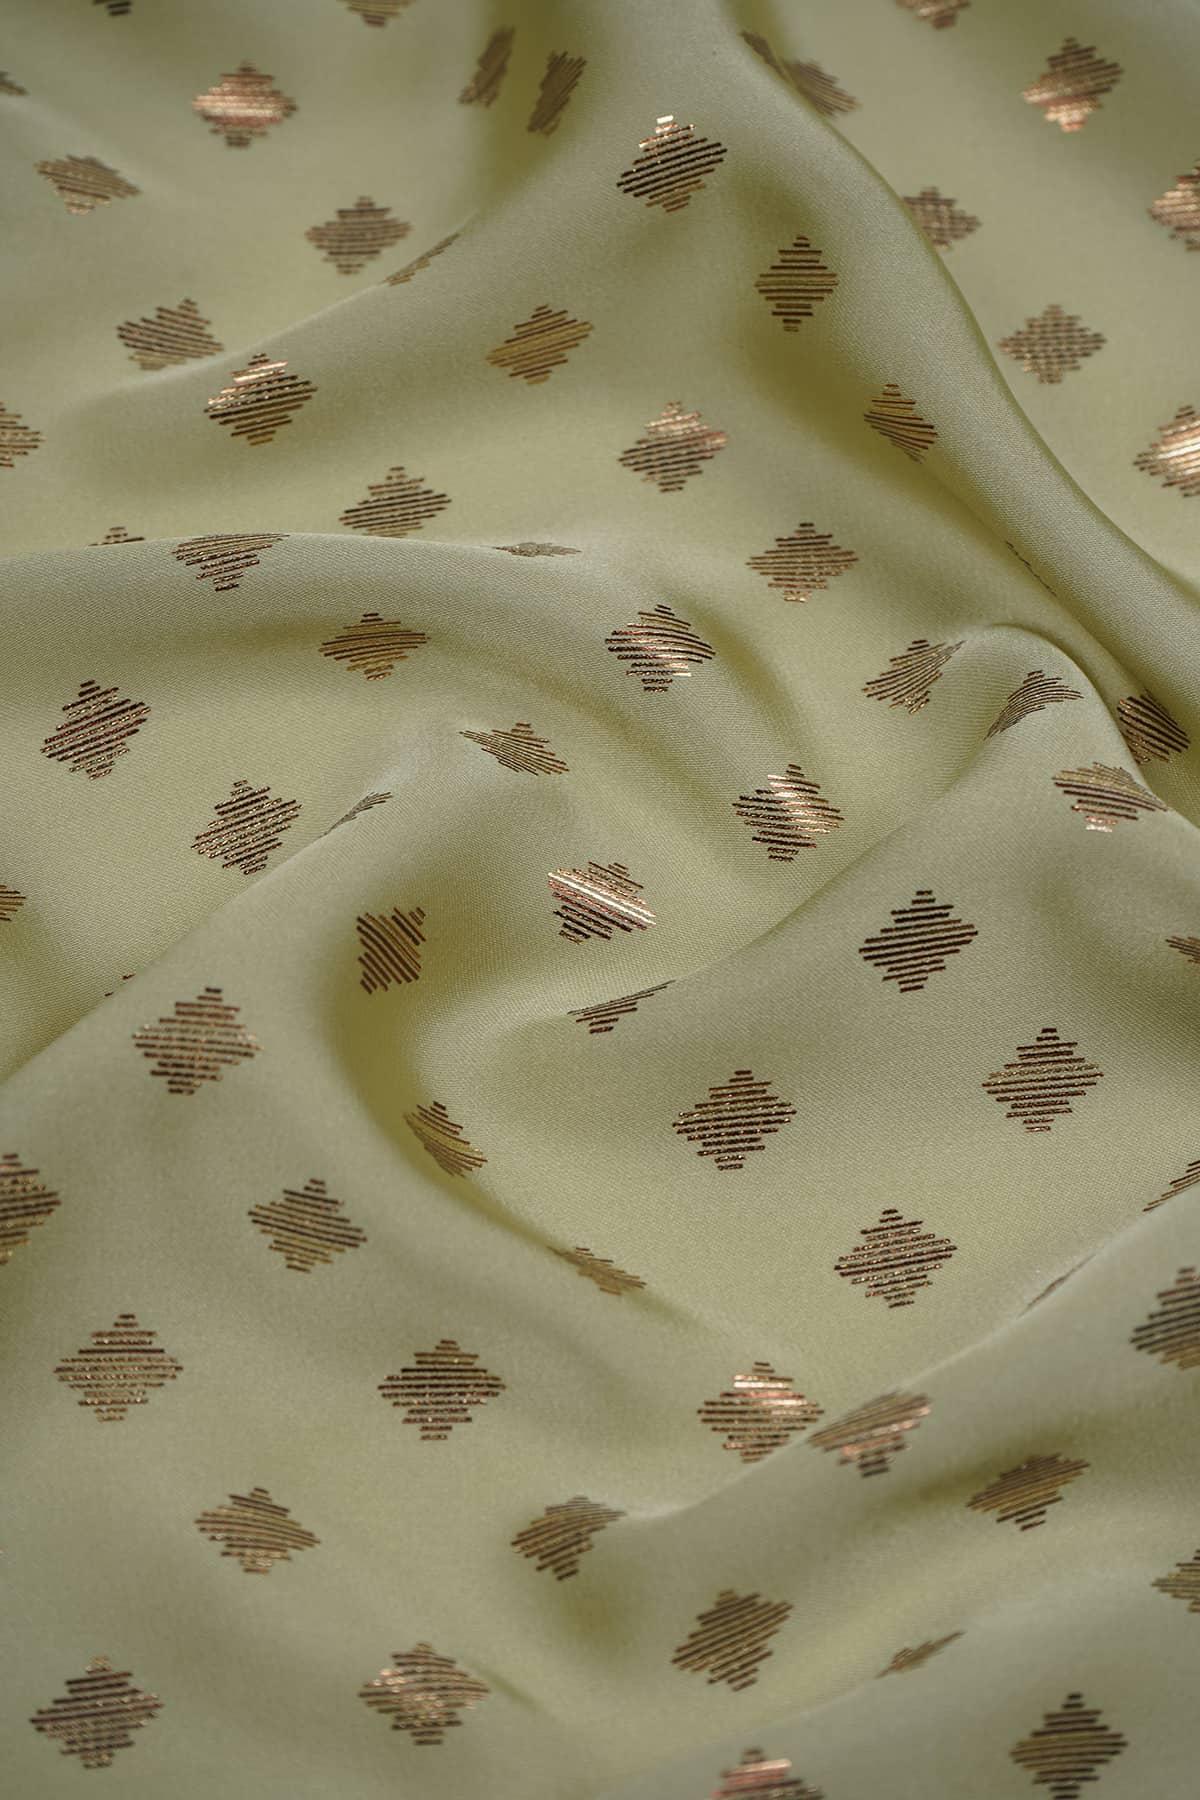 Geometric Square Print on Charmie Satin Fabric - saraaha.com - blouses, Charmie Satin, dresses and more, Festive, gowns, indo western, kurtas, Satin, Screen Print Foil Work, skirts, Suits, tops